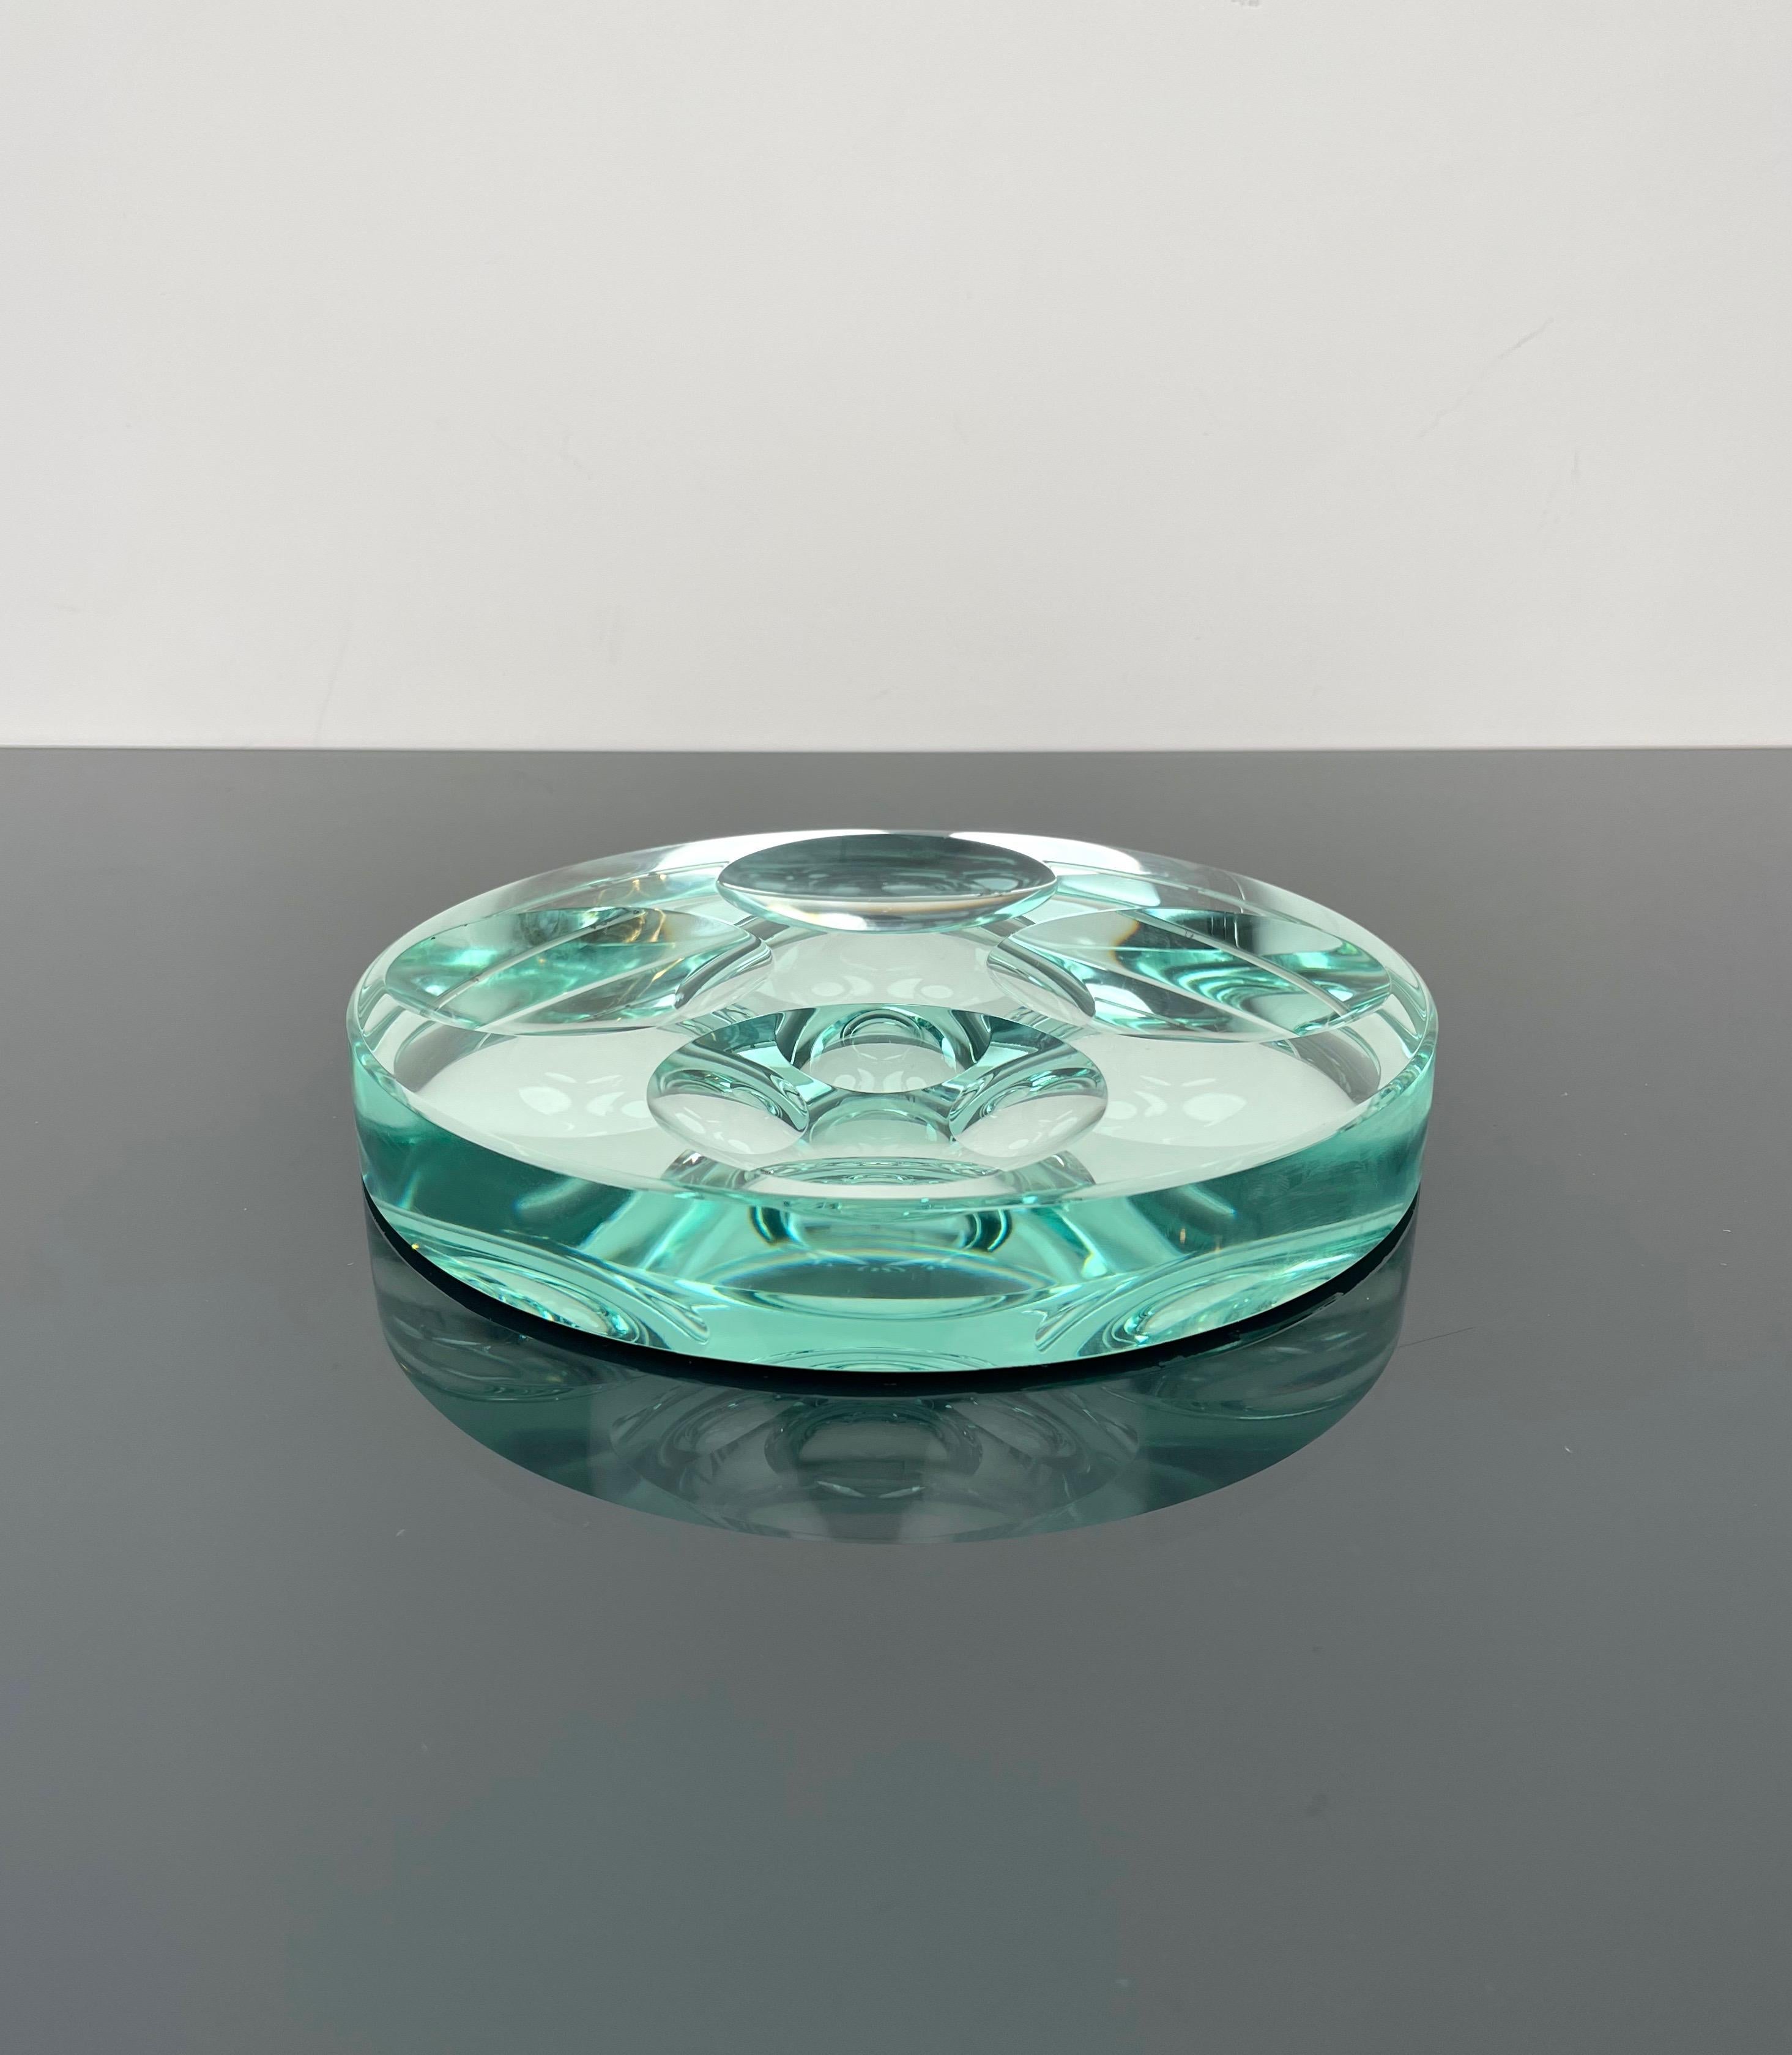 Mid-Century Modern Round Bowl or Ashtray in Green Glass Mirrored by Fontana Arte, Italy 1960s For Sale